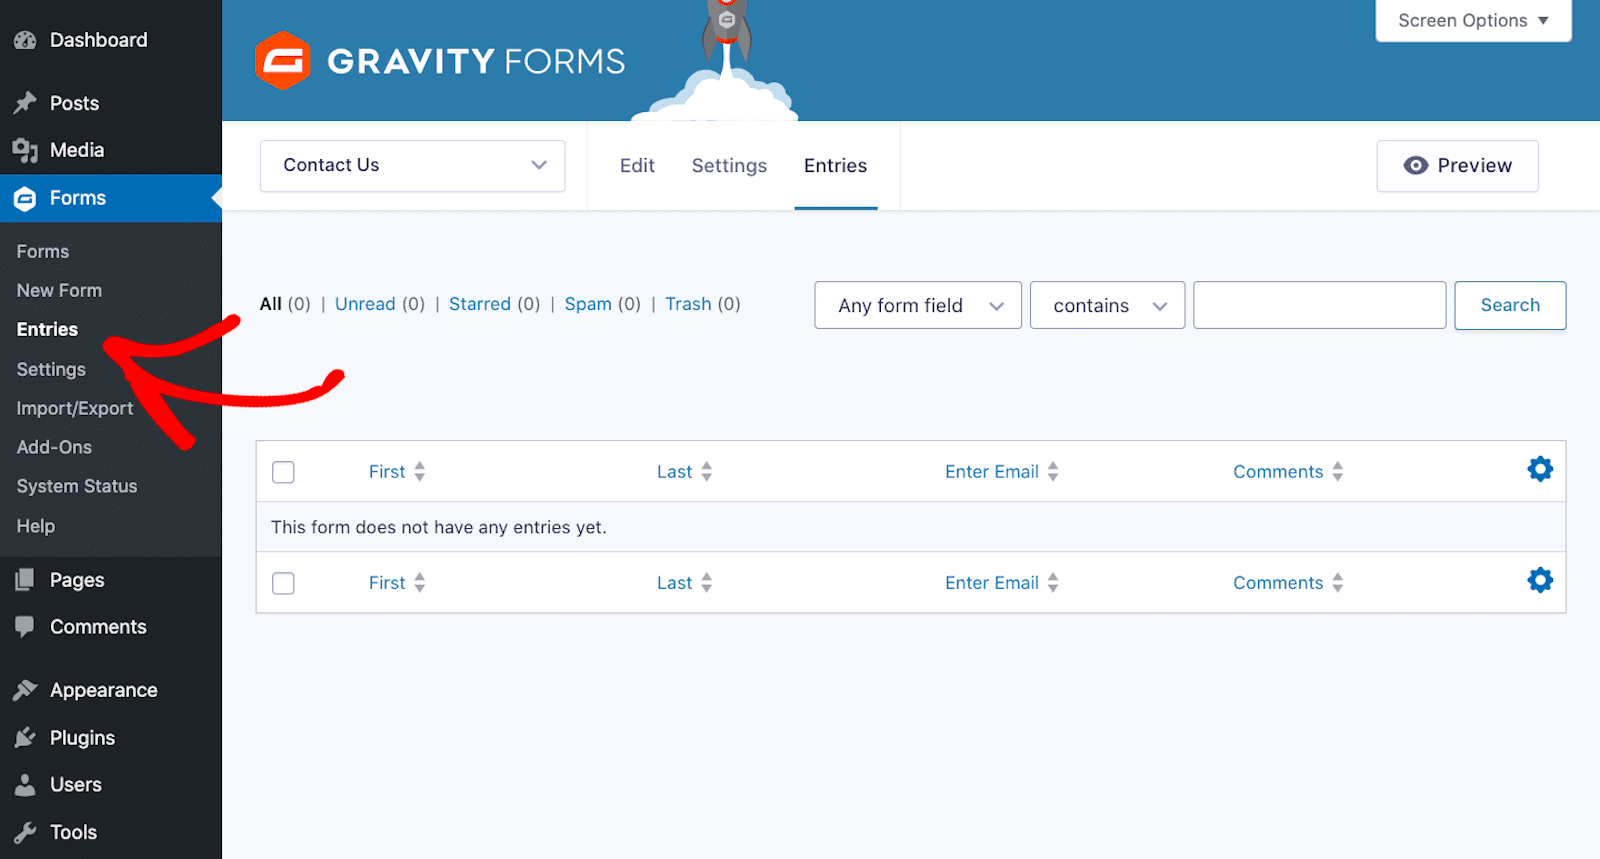 Viewing Gravity Forms entries from the dashboard